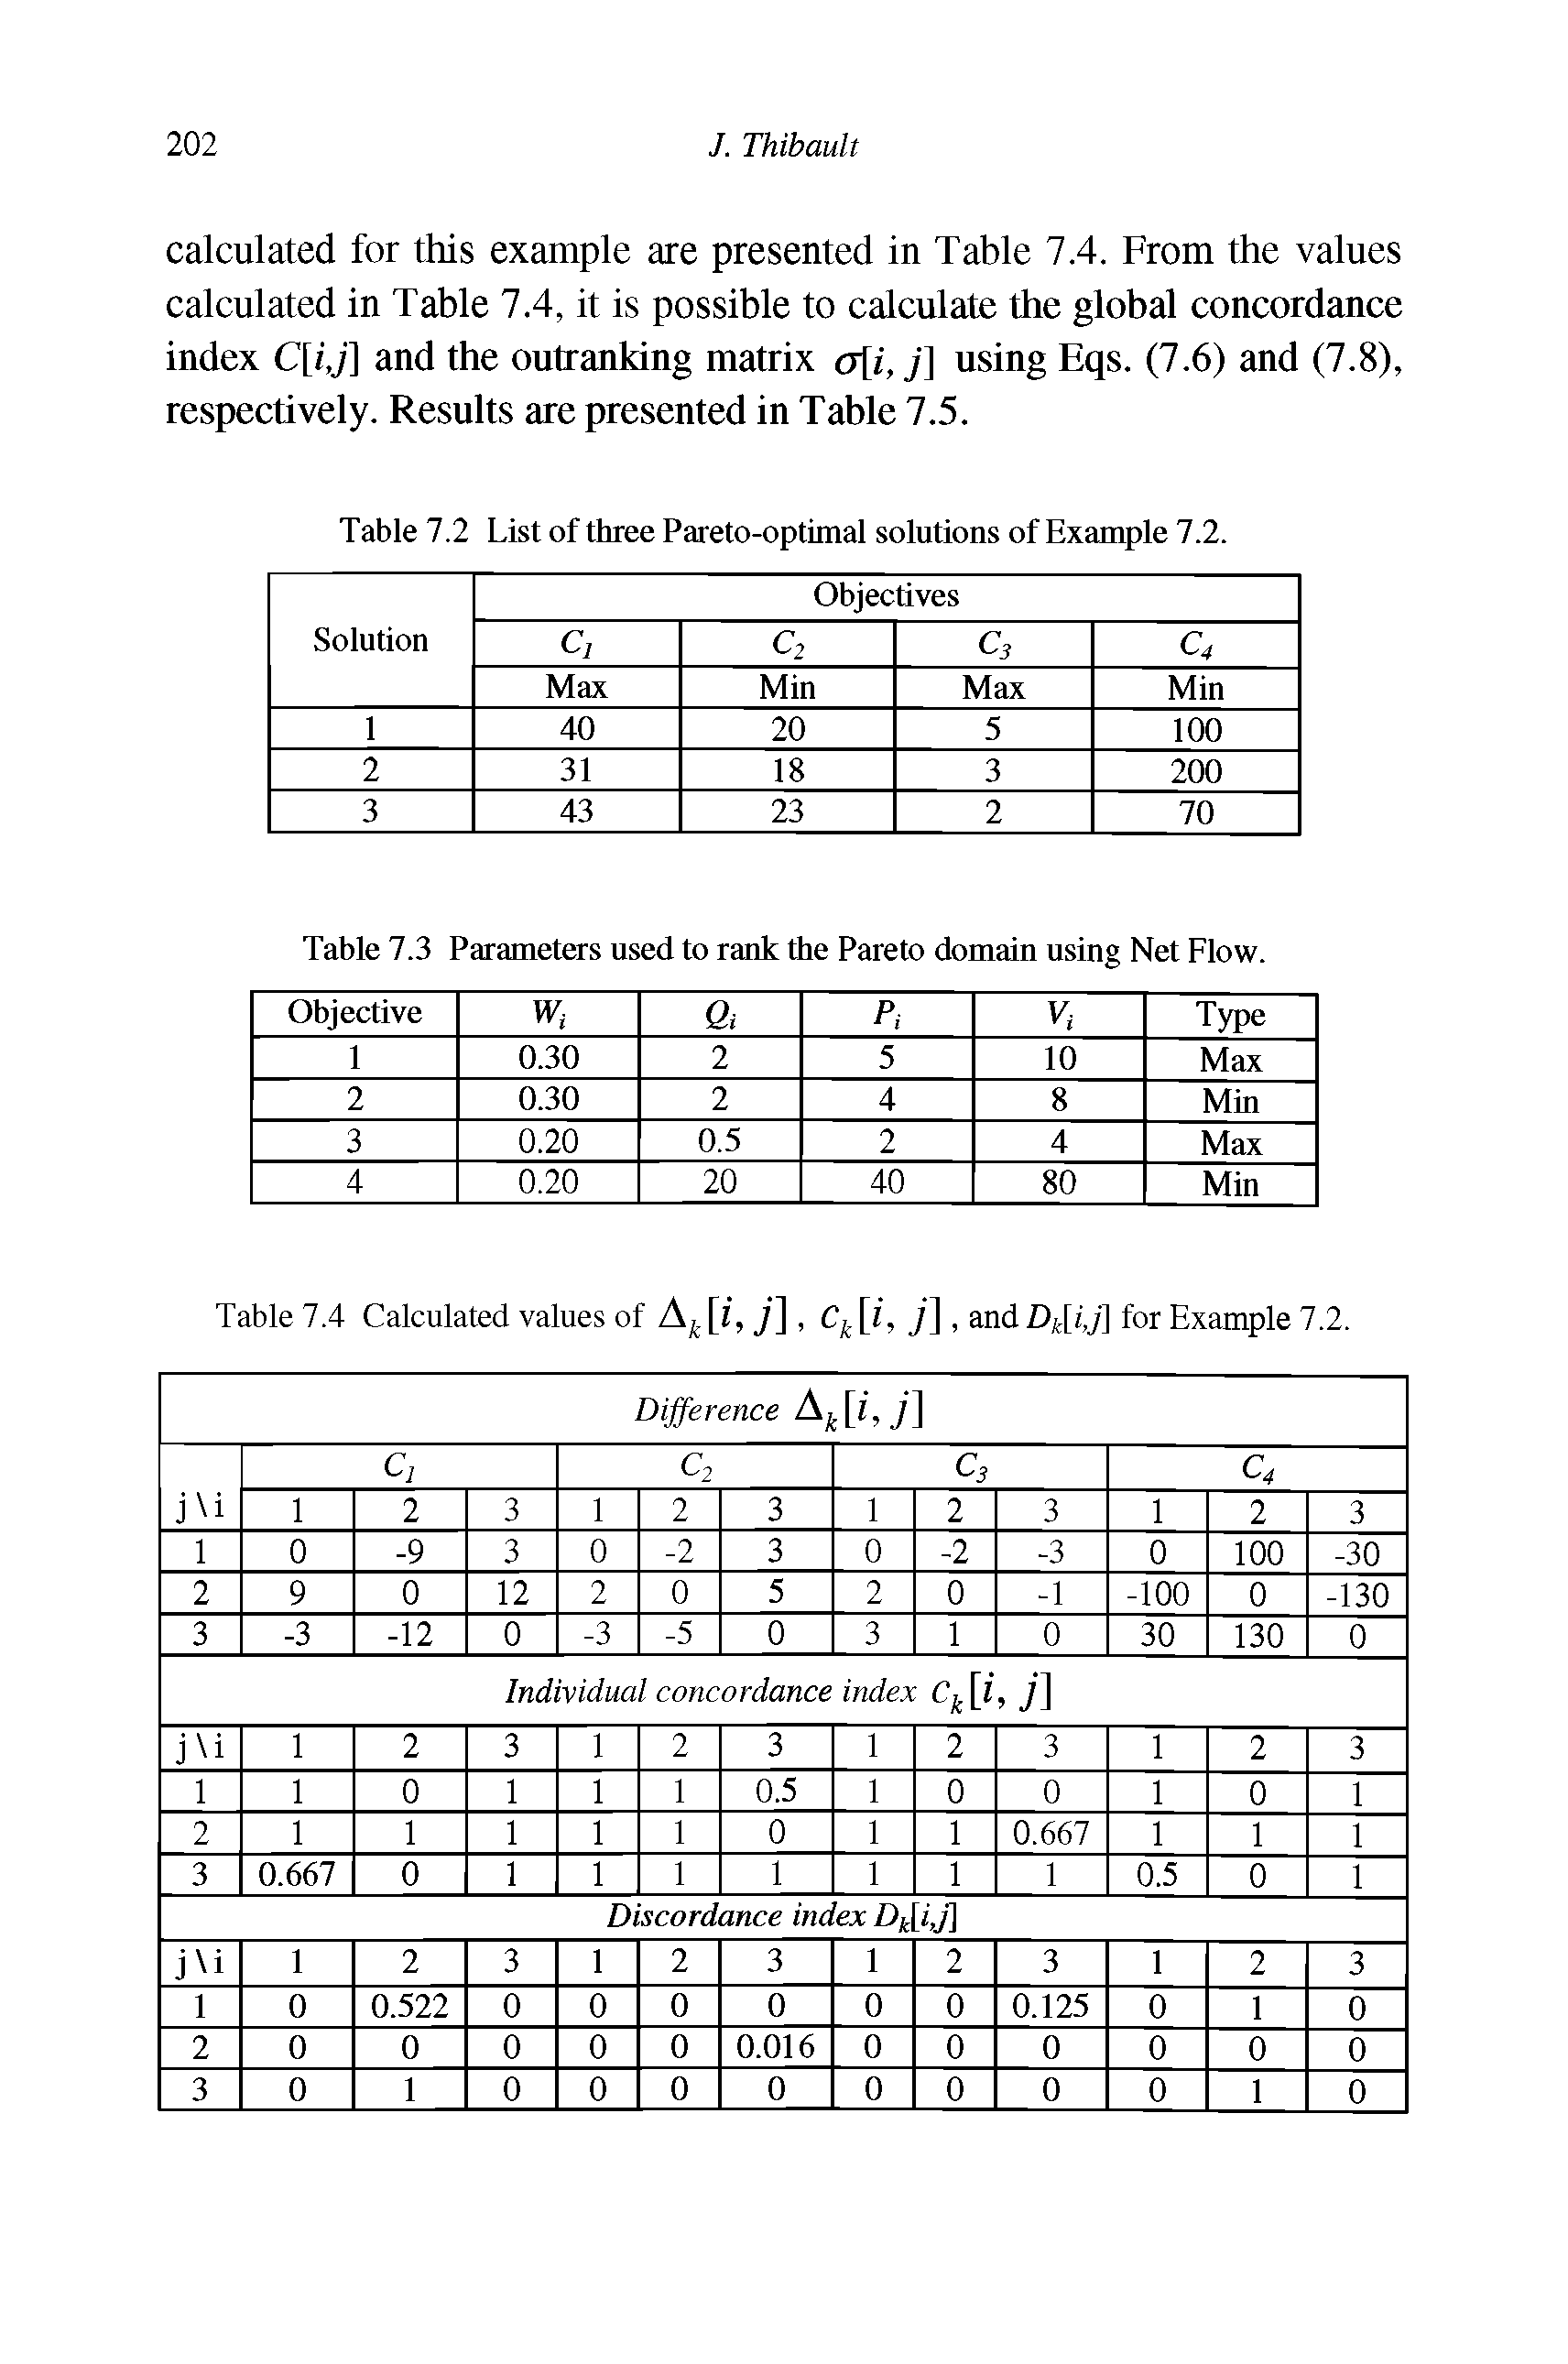 Table 7.3 Parameters used to rank the Pareto domain nsing Net Flow.